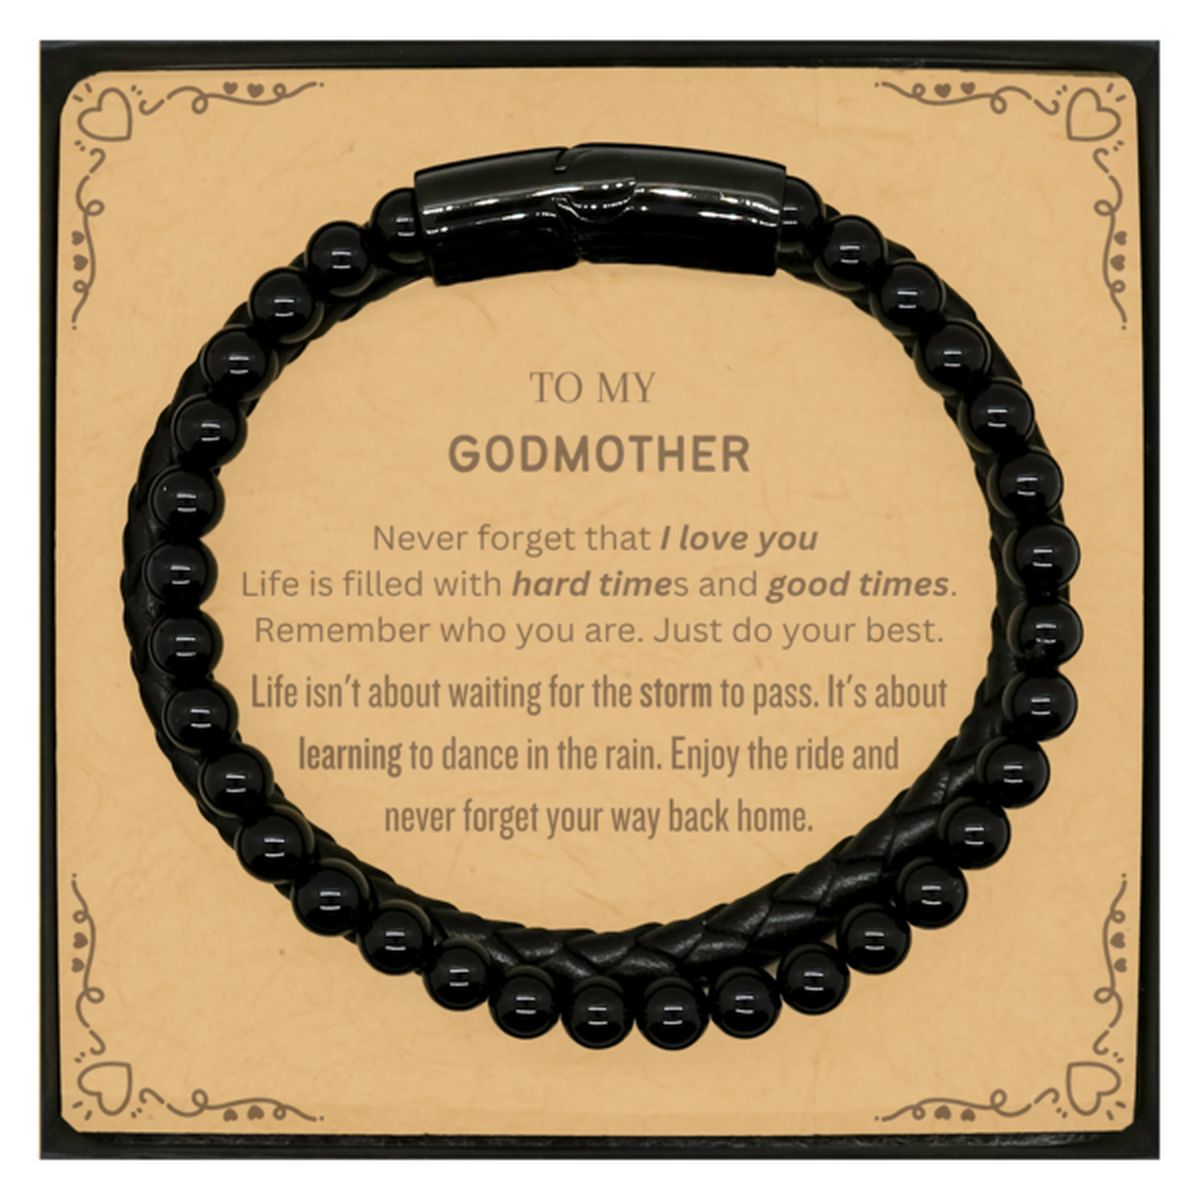 Christmas Godmother Stone Leather Bracelets Gifts, To My Godmother Birthday Thank You Gifts For Godmother, Graduation Unique Gifts For Godmother To My Godmother Never forget that I love you life is filled with hard times and good times. Remember who you a